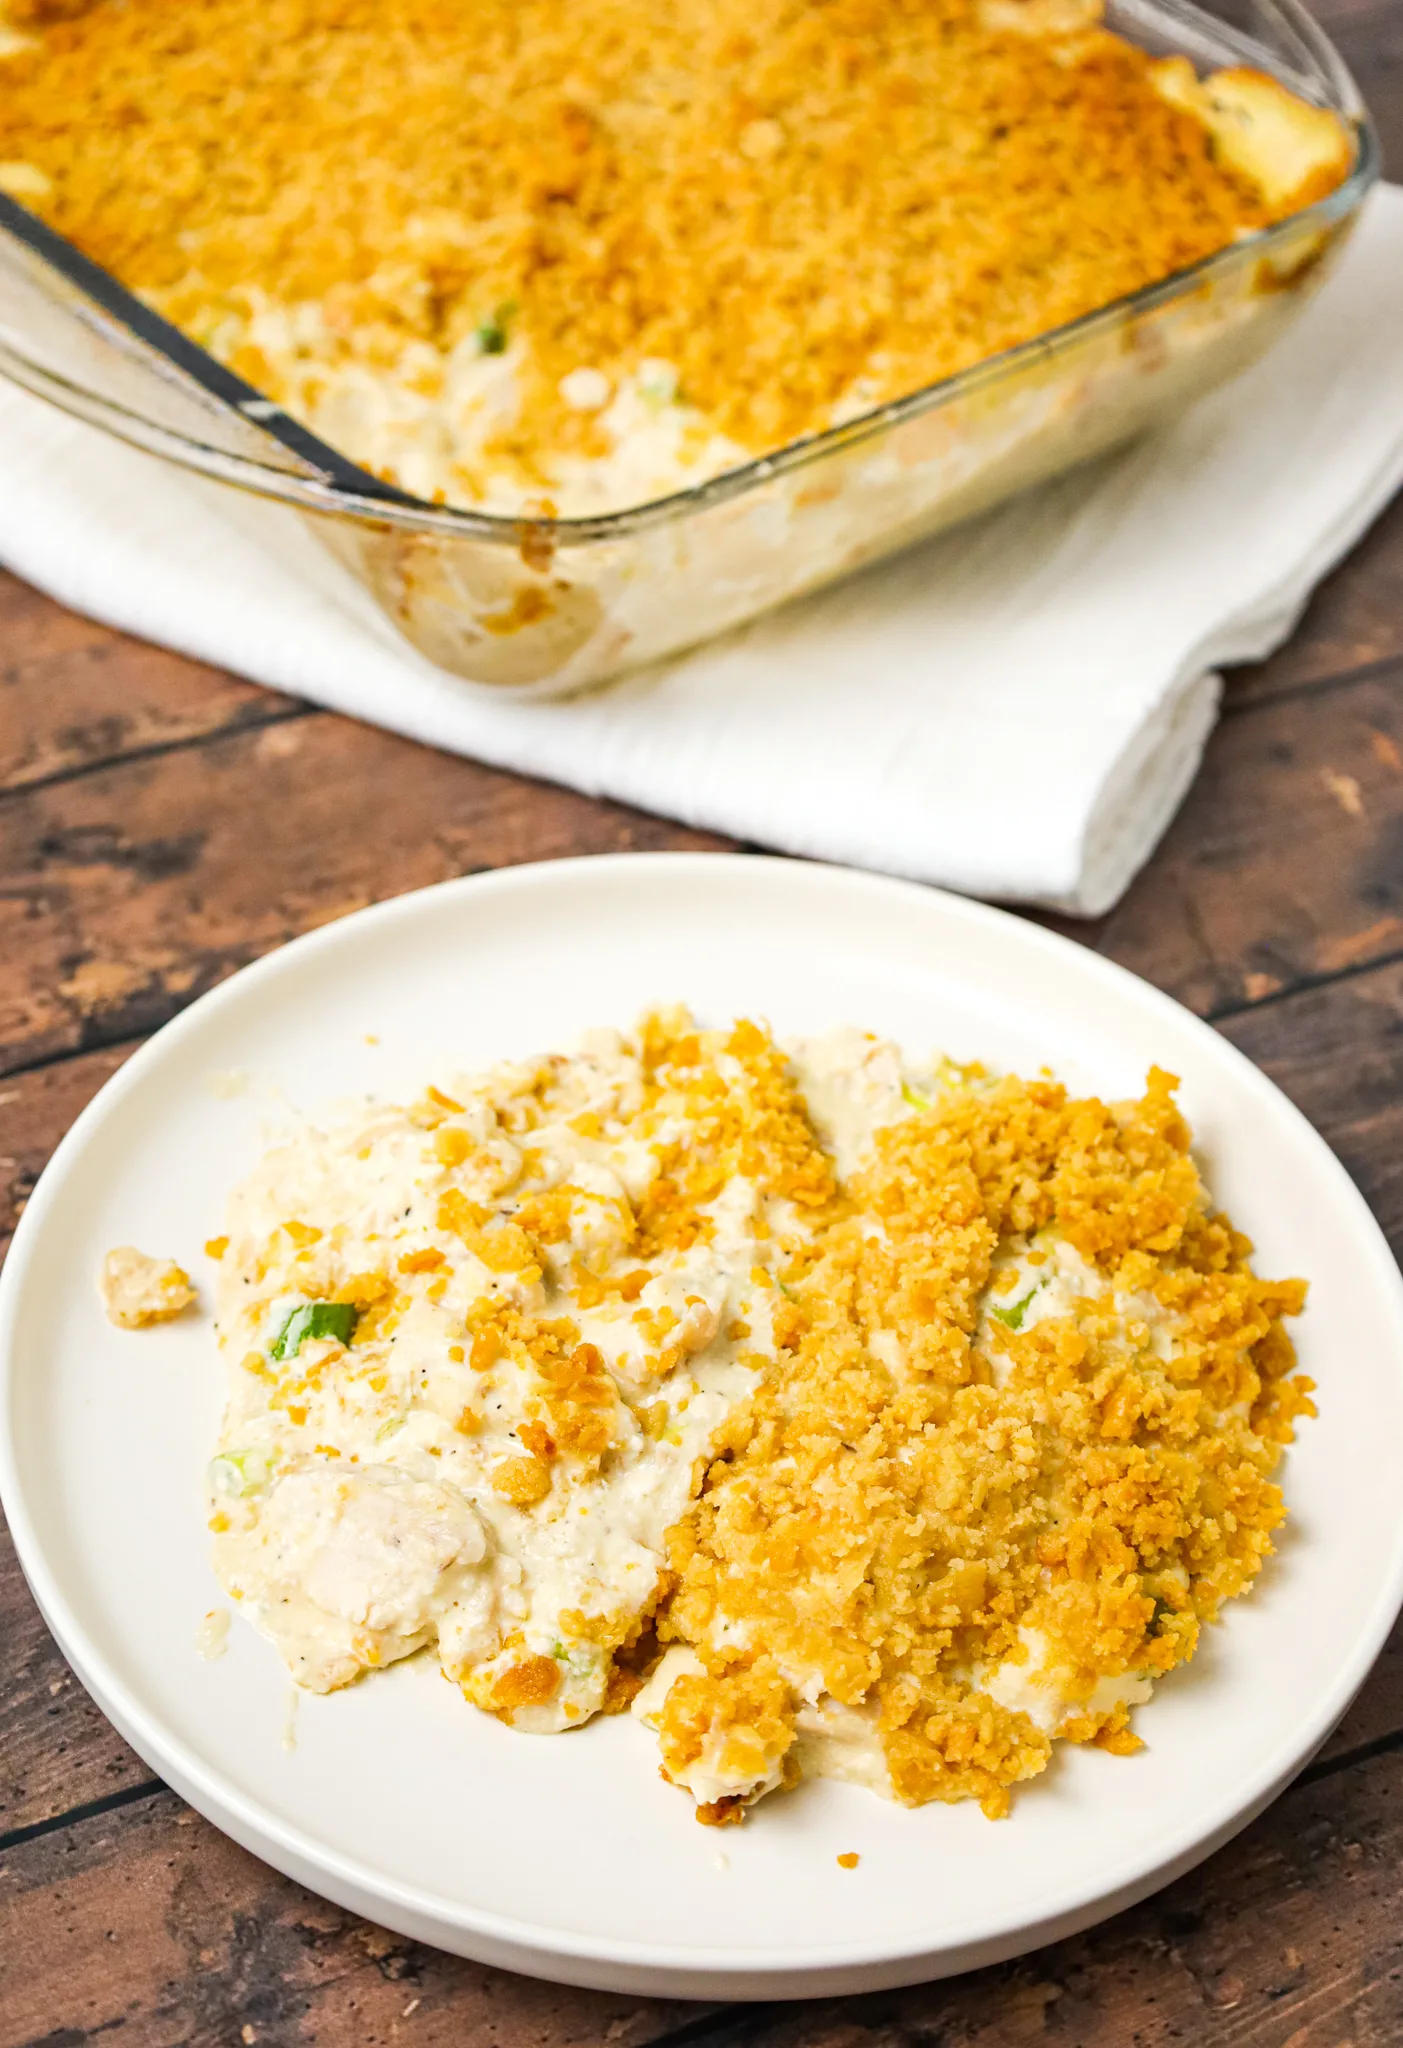 Million Dollar Chicken Casserole is an easy chicken casserole recipe using precooked shredded chicken in a creamy sauce and topped with Ritz cracker crumbs.